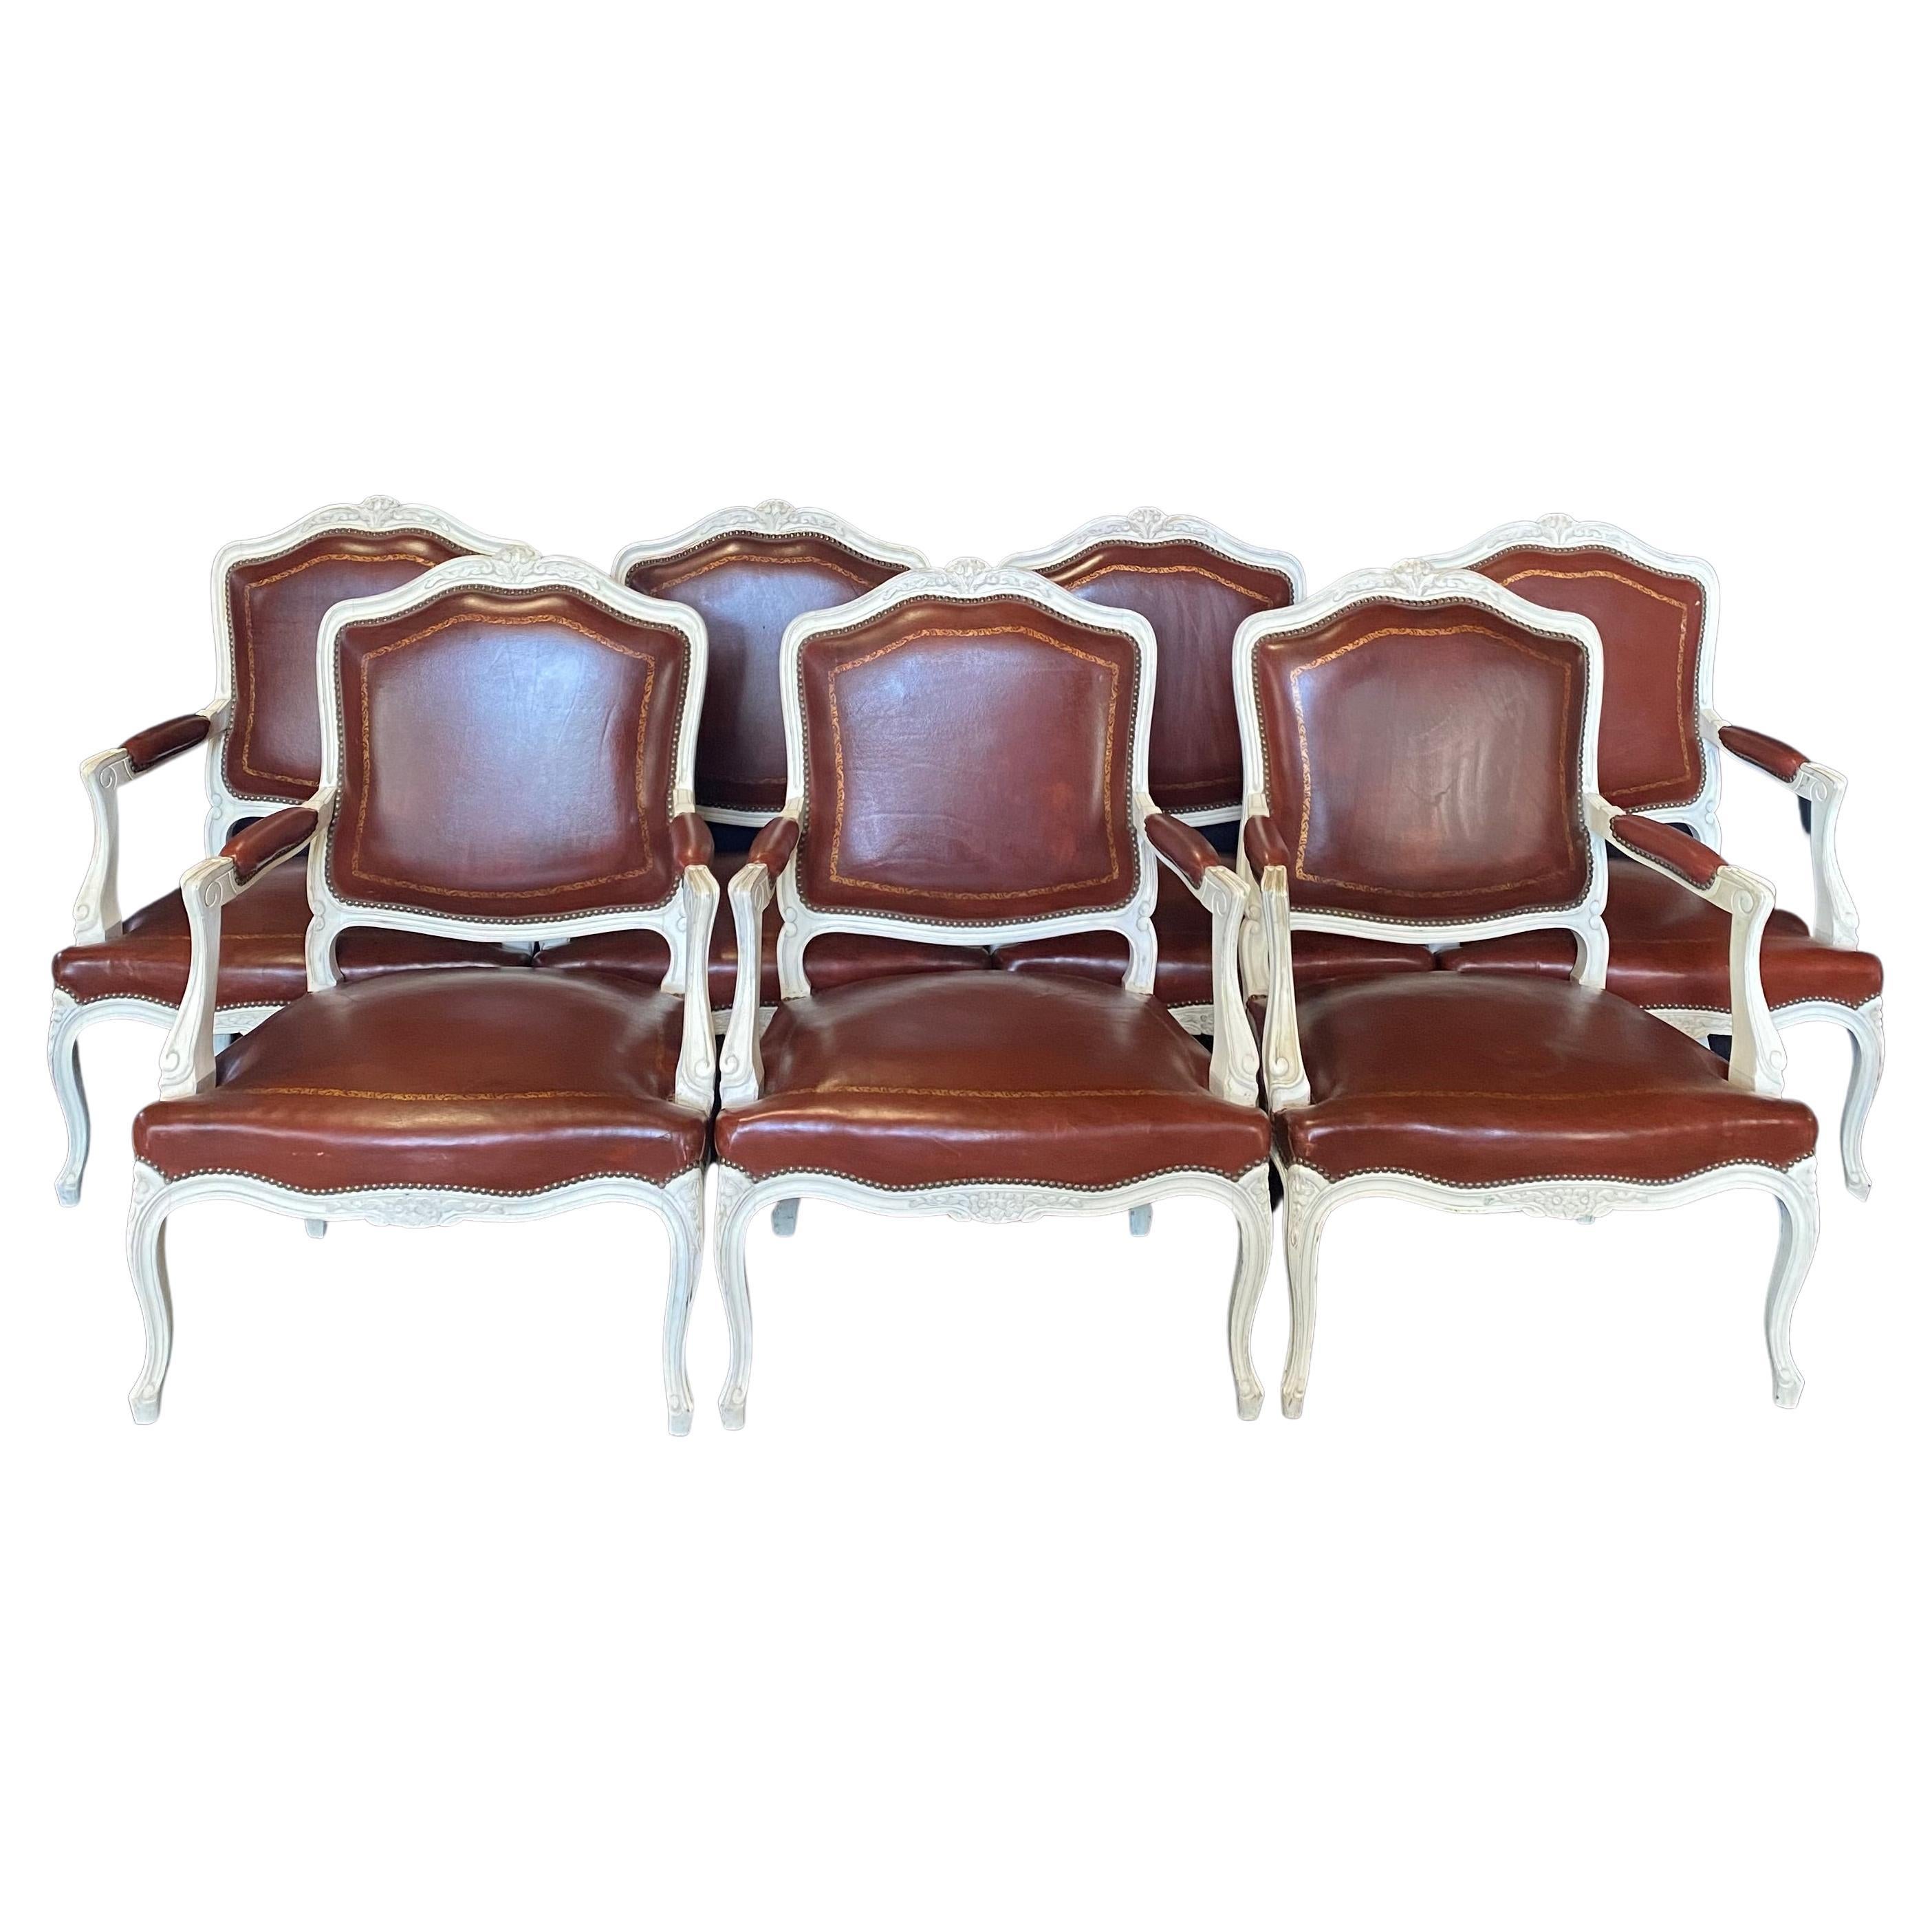 Sumptuous Set of 7 Louis XV Leather Embossed Painted Wood Armchairs For Sale